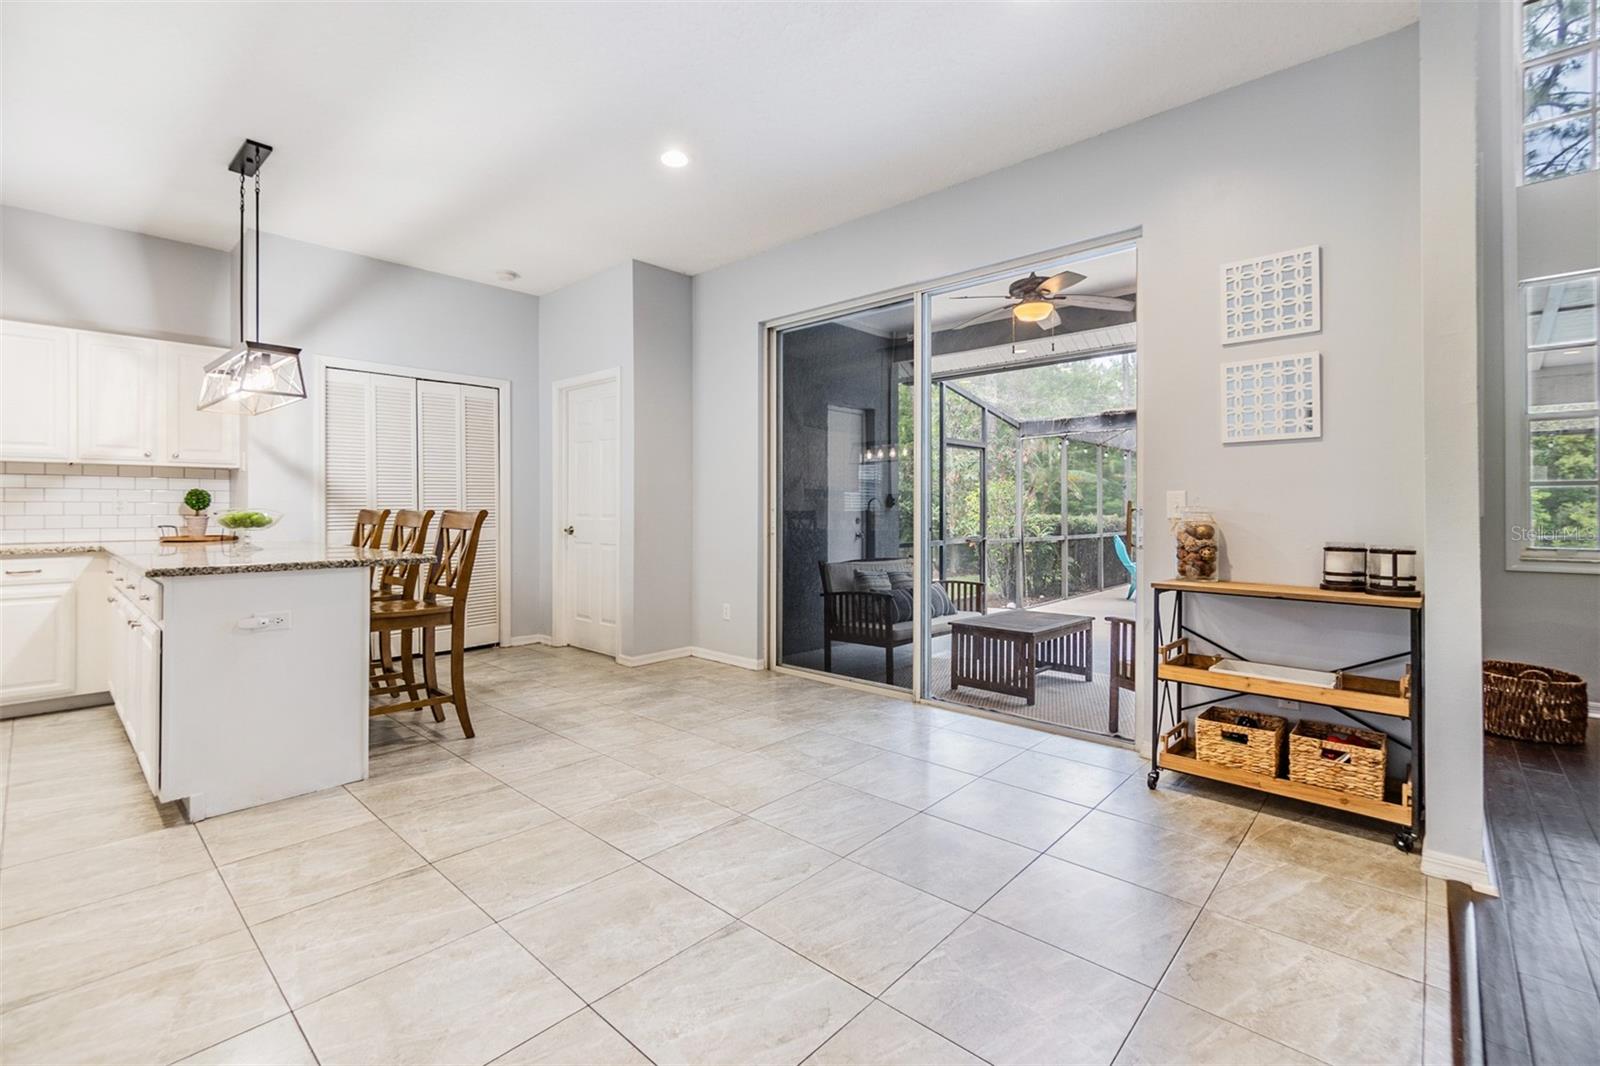 Open space for a Kitchen table that leads into the Family Room, with views of the pool.